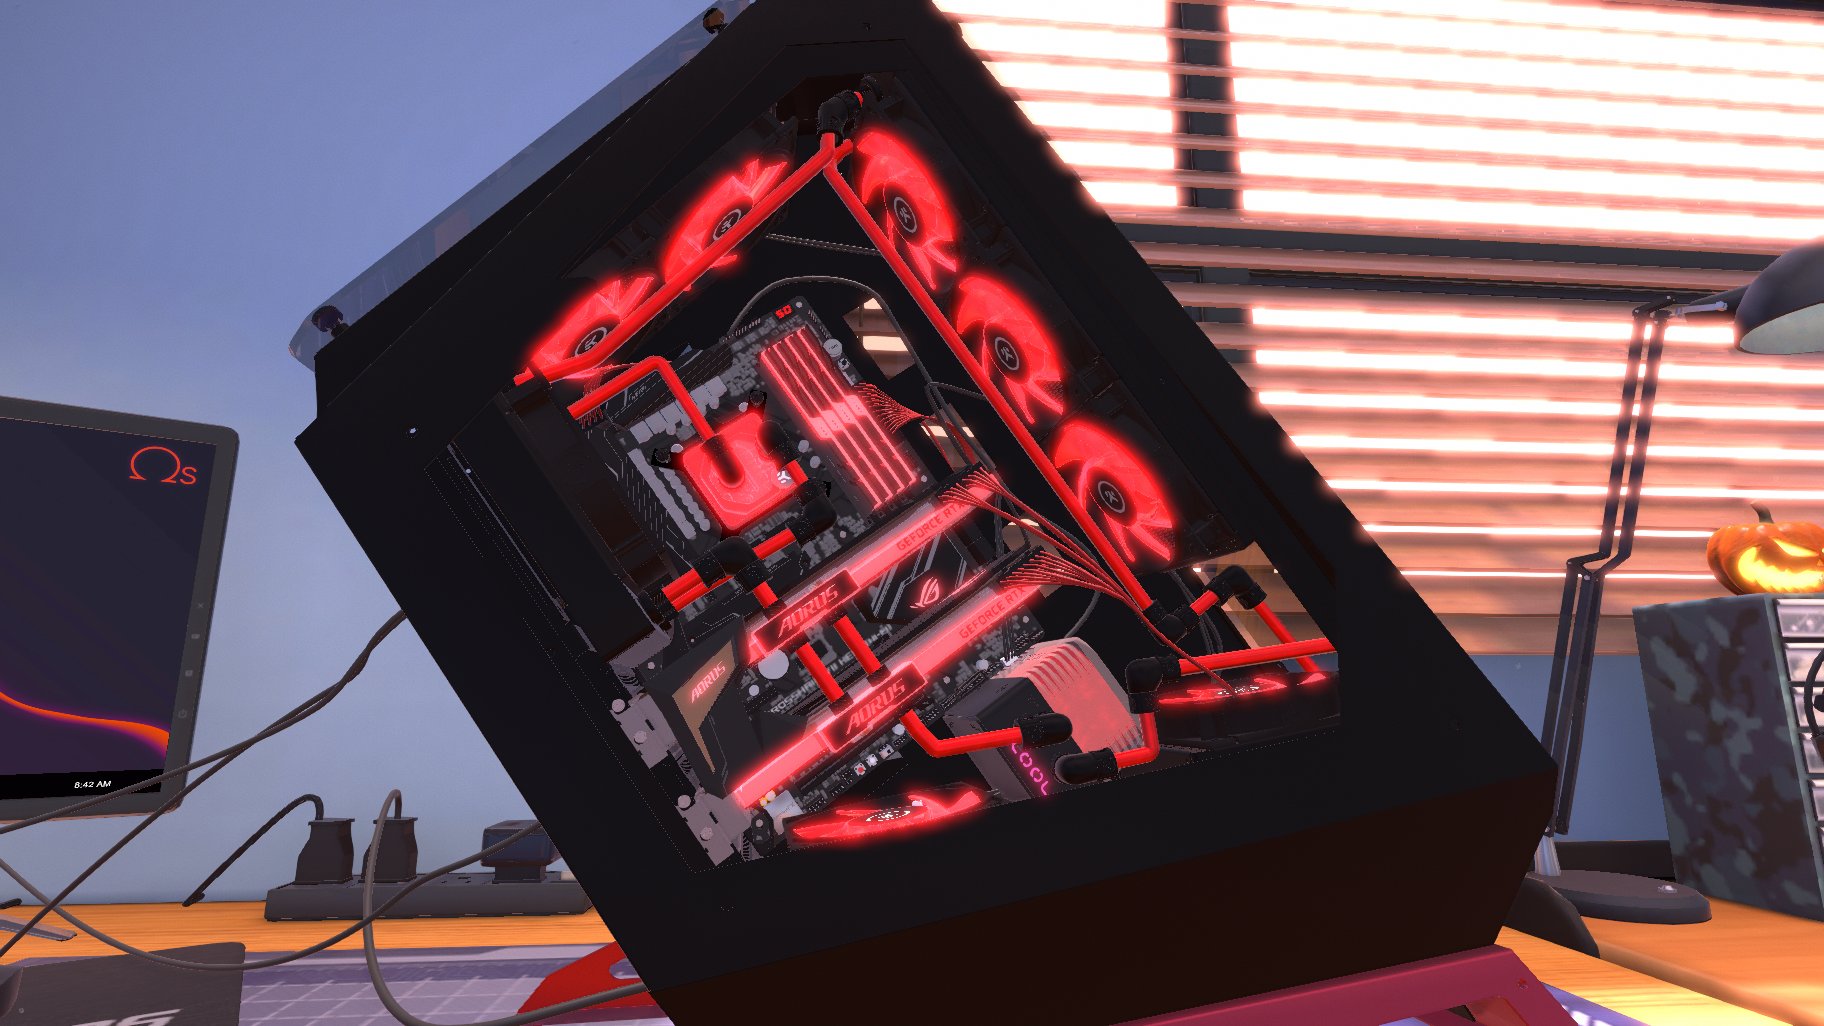 PC Sim on Twitter: "Big red #FanBuildFriday https://t.co/jh36C0WHZV" / Twitter